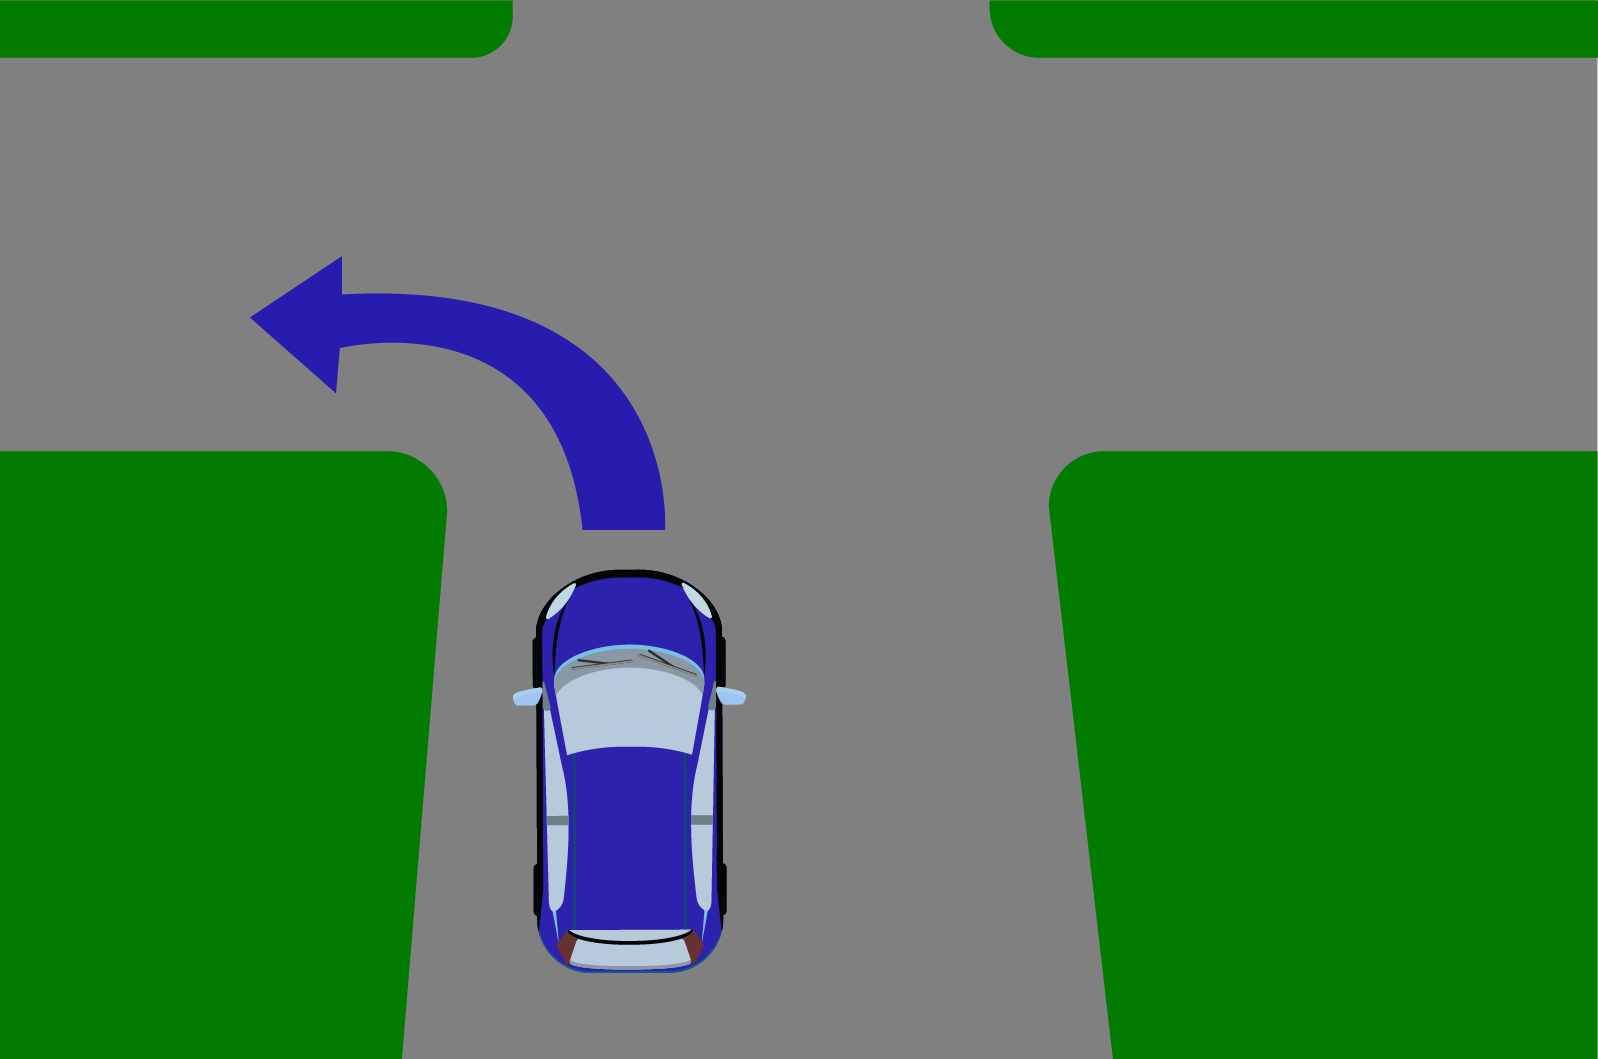 The car on the left is. Turn left. Car to the left. Turn left at the Traffic Lights. Car in left.